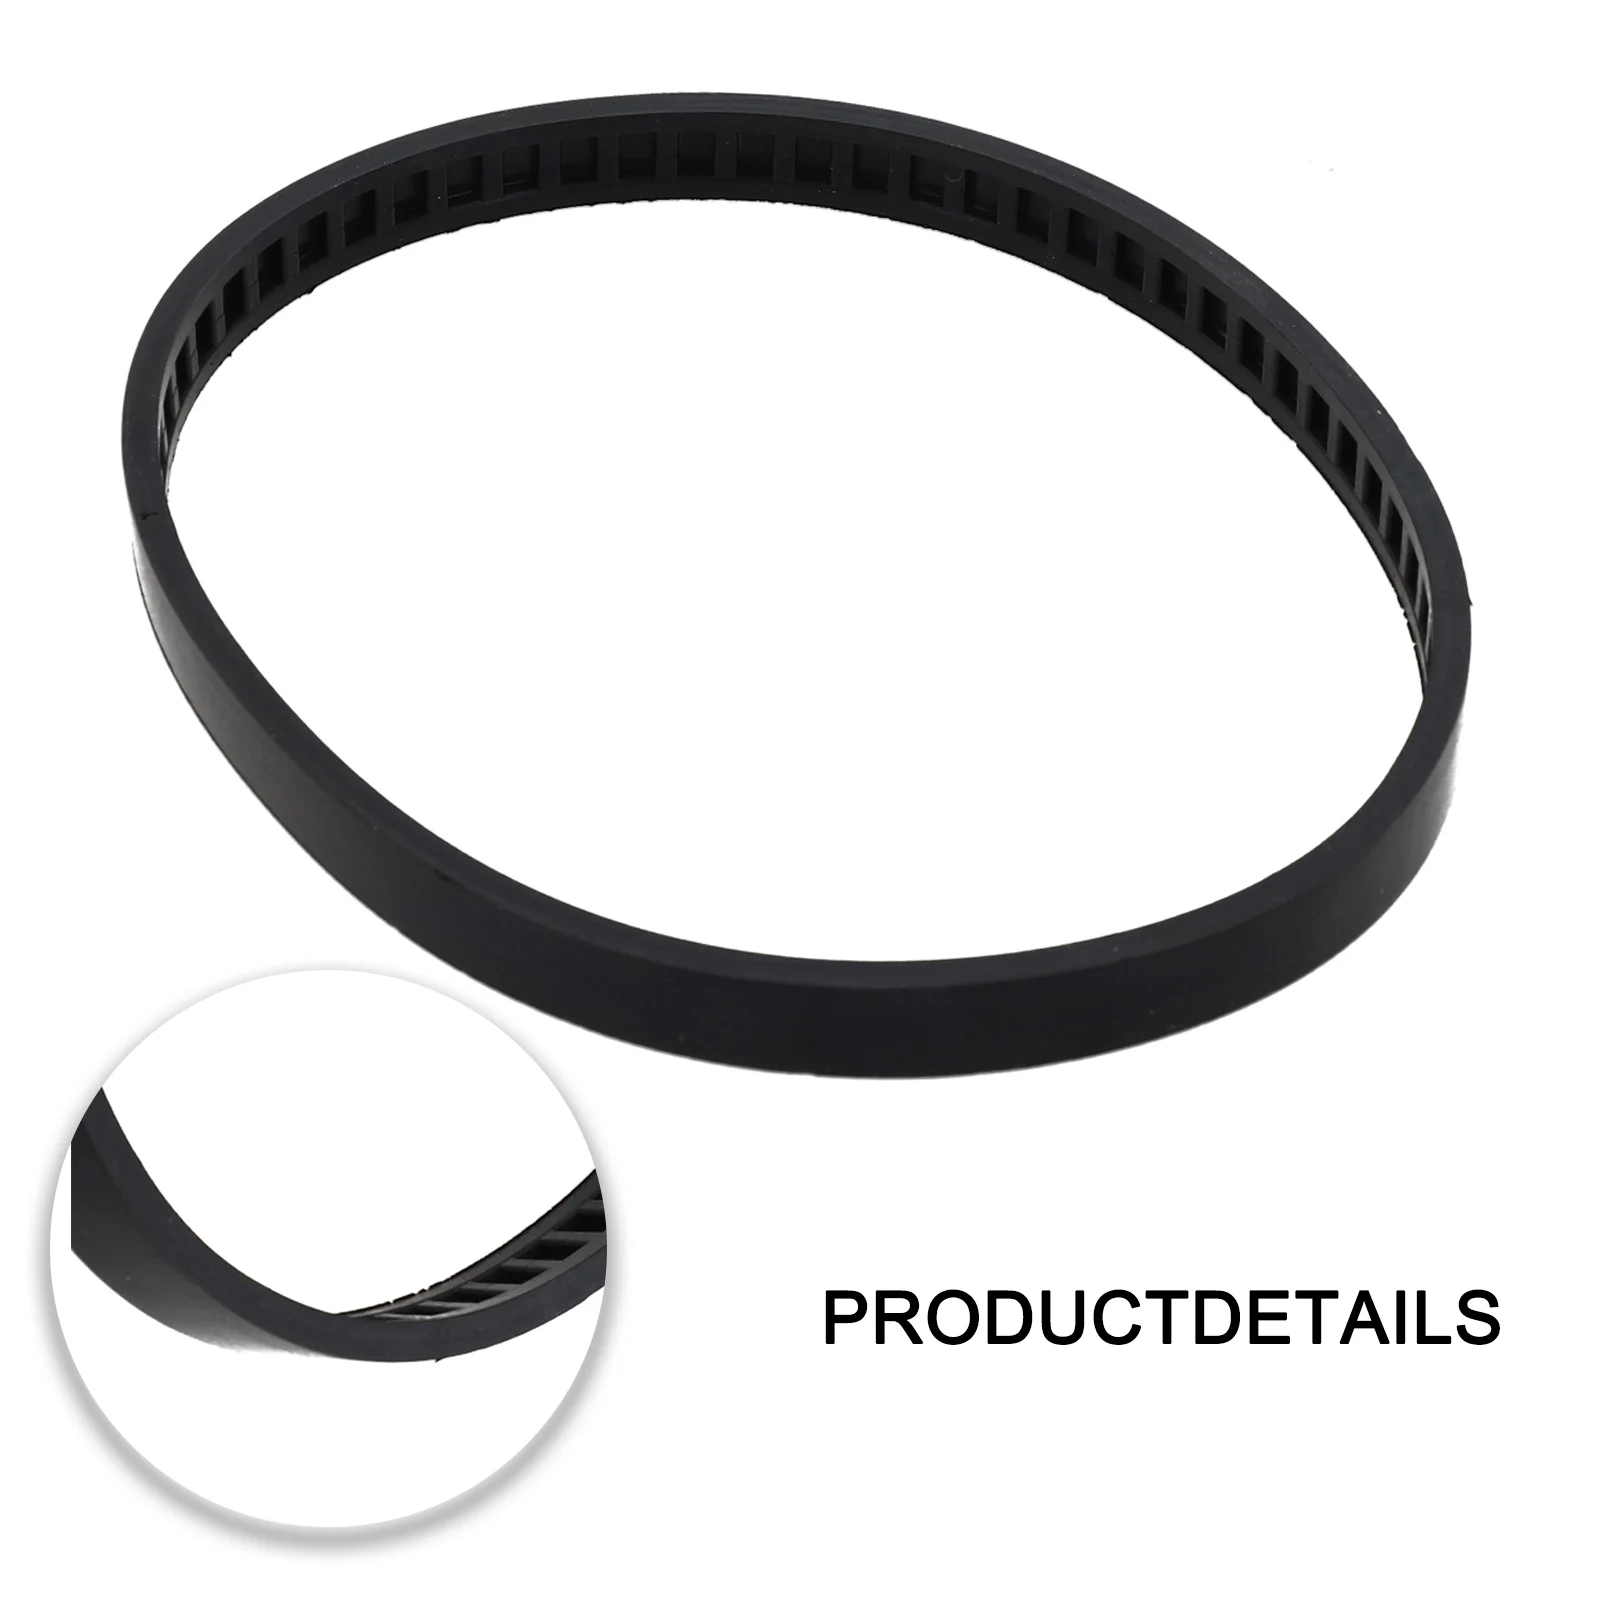 transmission belt 920h 930h 940h 950h 960h 970h 980h 985h 1000h 1020h teeth pitch 12 7 mm rubber pulley belt width 25 30 mm 45-69-0010 Blade Pulley Tire For Milwaukee Bandsaw Part Deep Cutting Blades Balck Elastic Rubber Belt For Bandsaw Blade